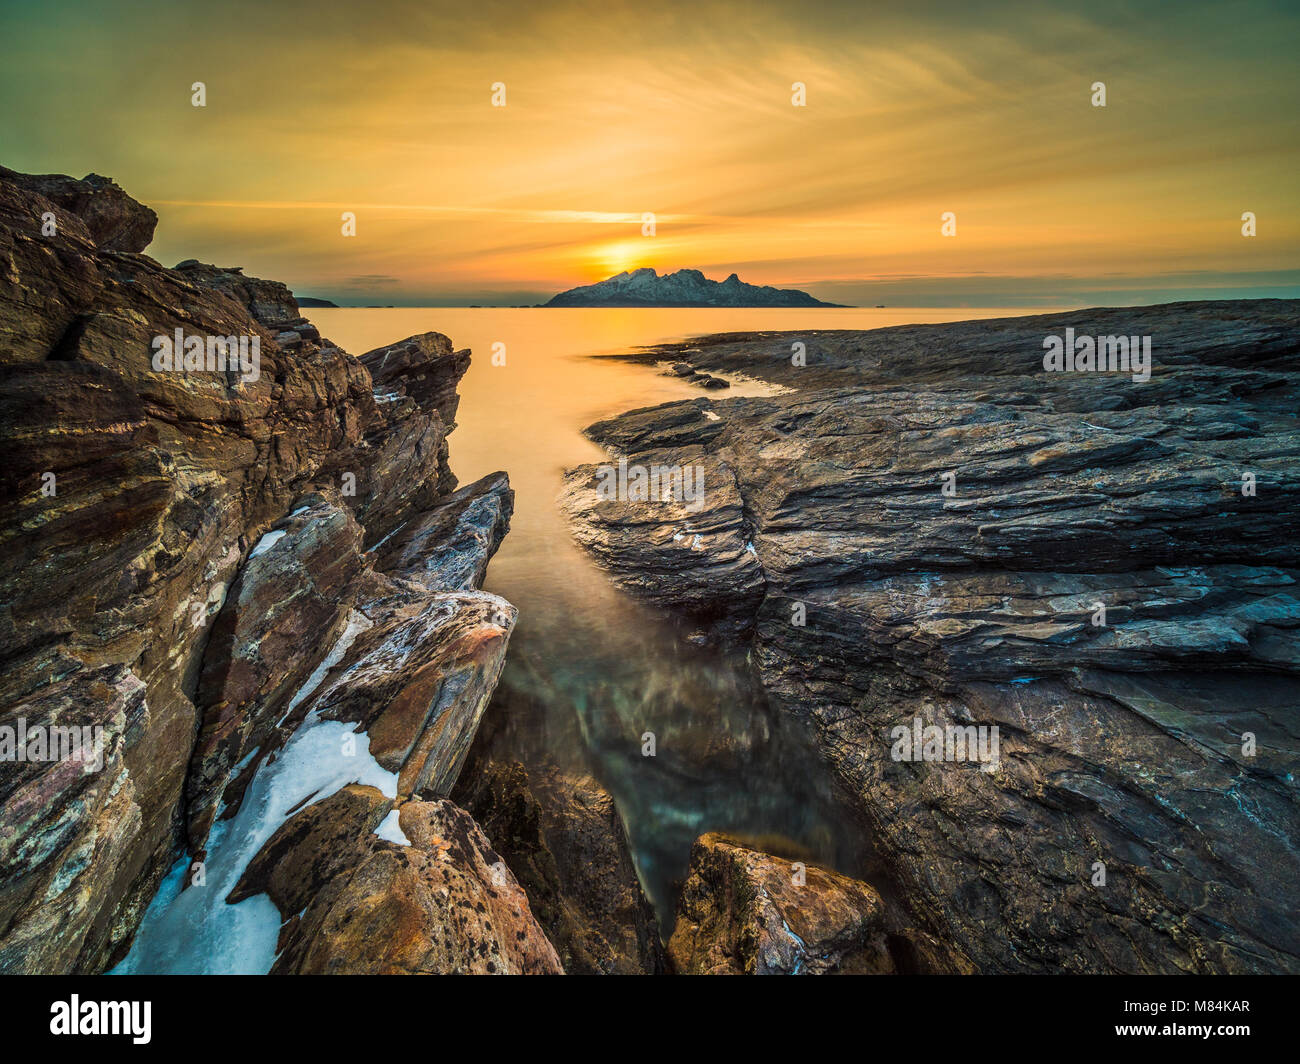 The island of Landegode in the sunset Stock Photo